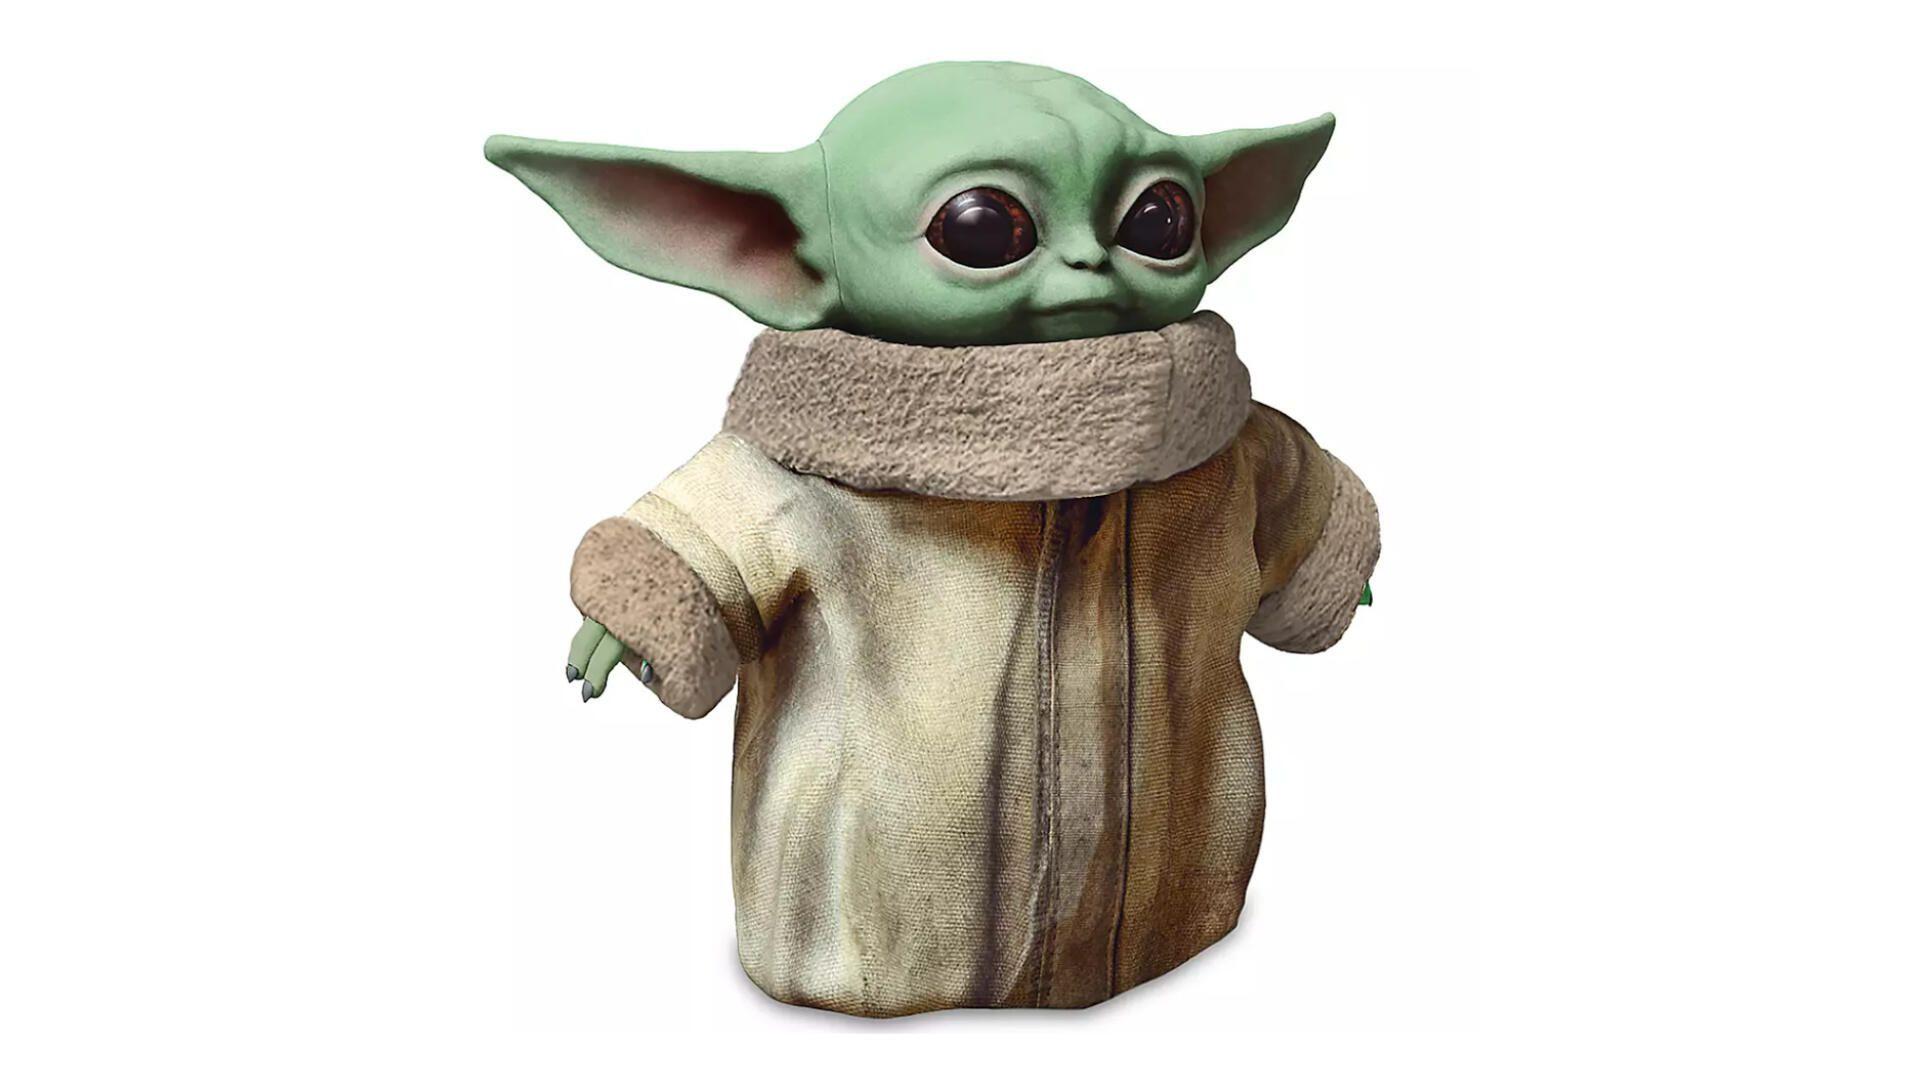 Baby Yoda merchandise started slow, but plushies and puzzles